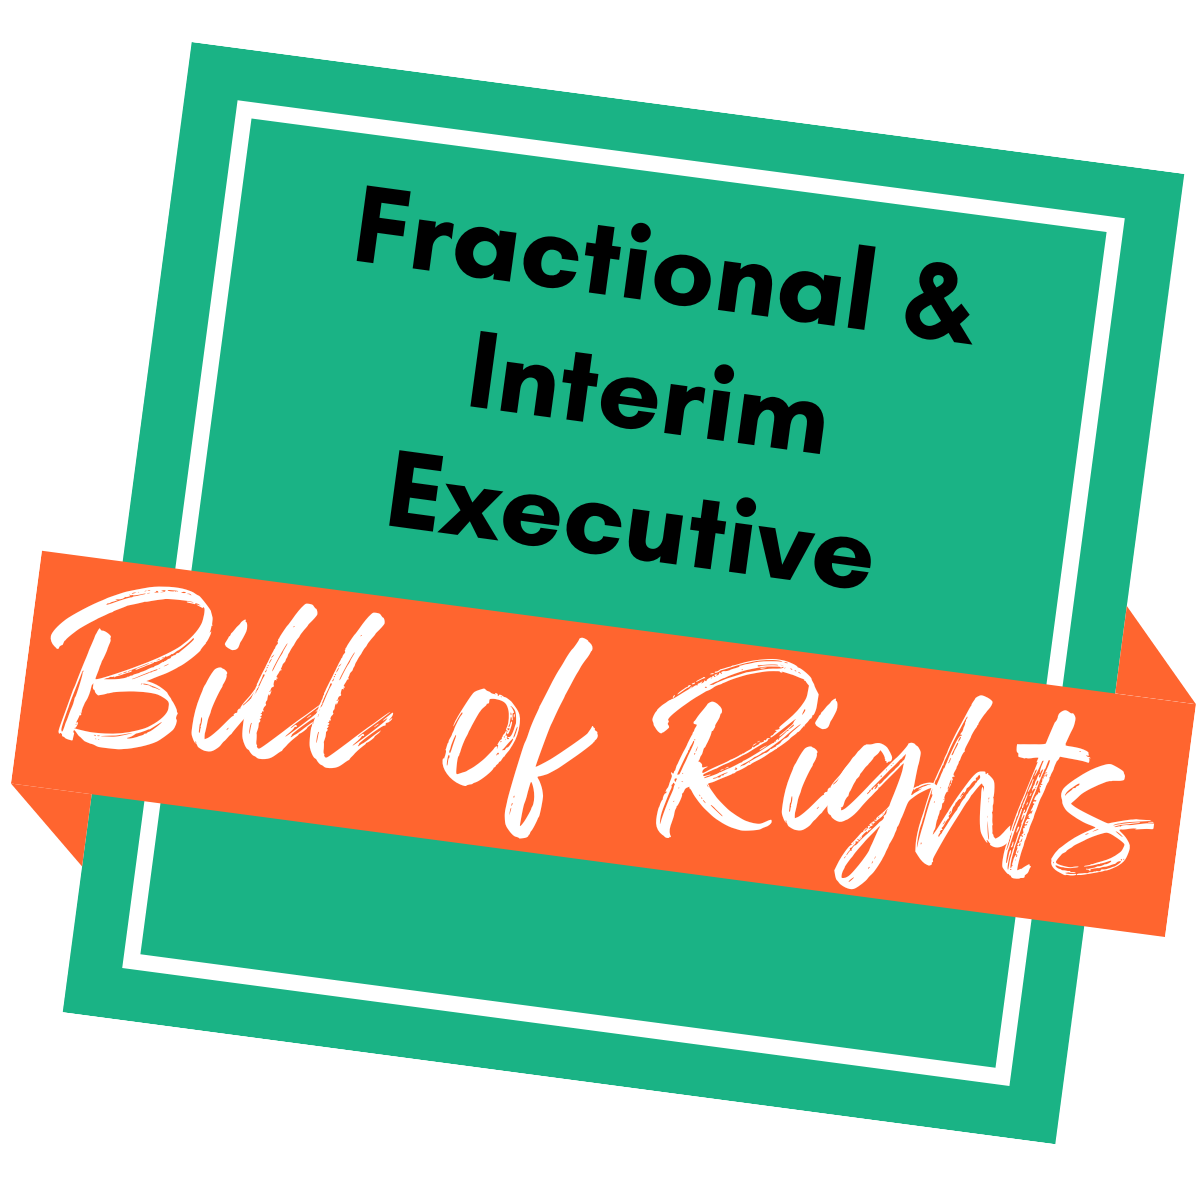 Vendux Publishes Bill of Rights for Fractional and Interim Executives